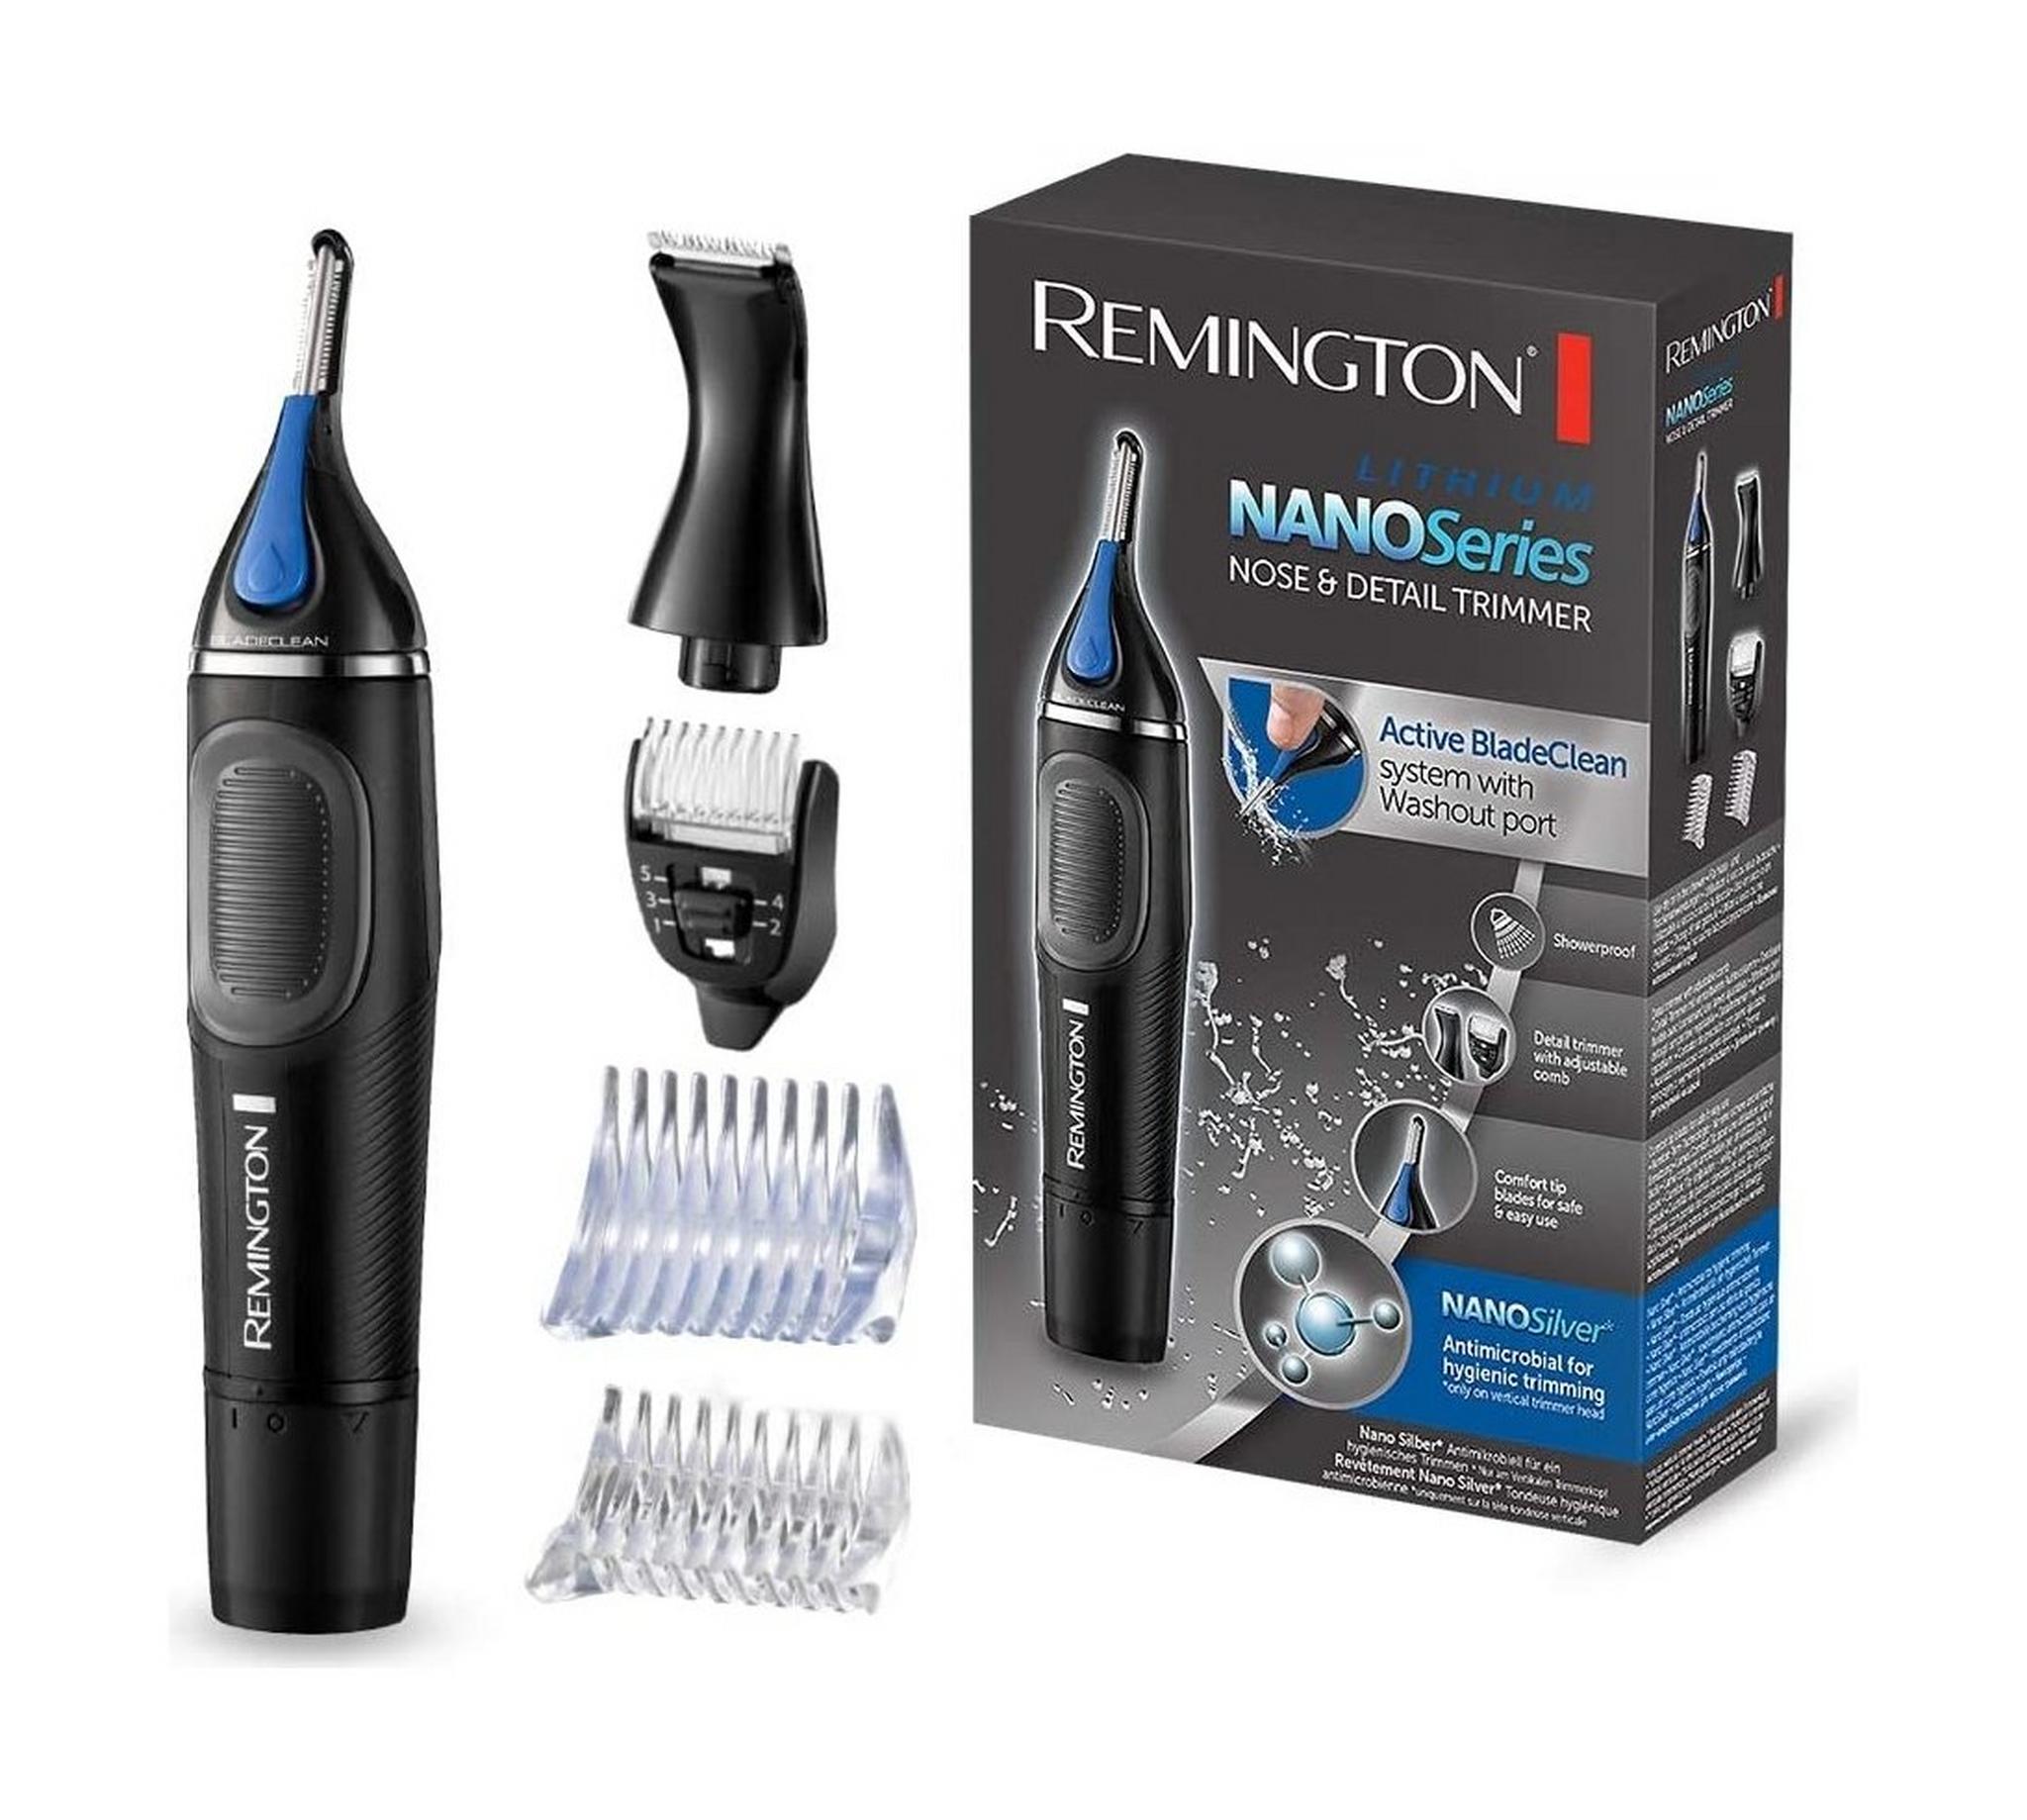 Remington NE3870 Nose and Ear Trimmer